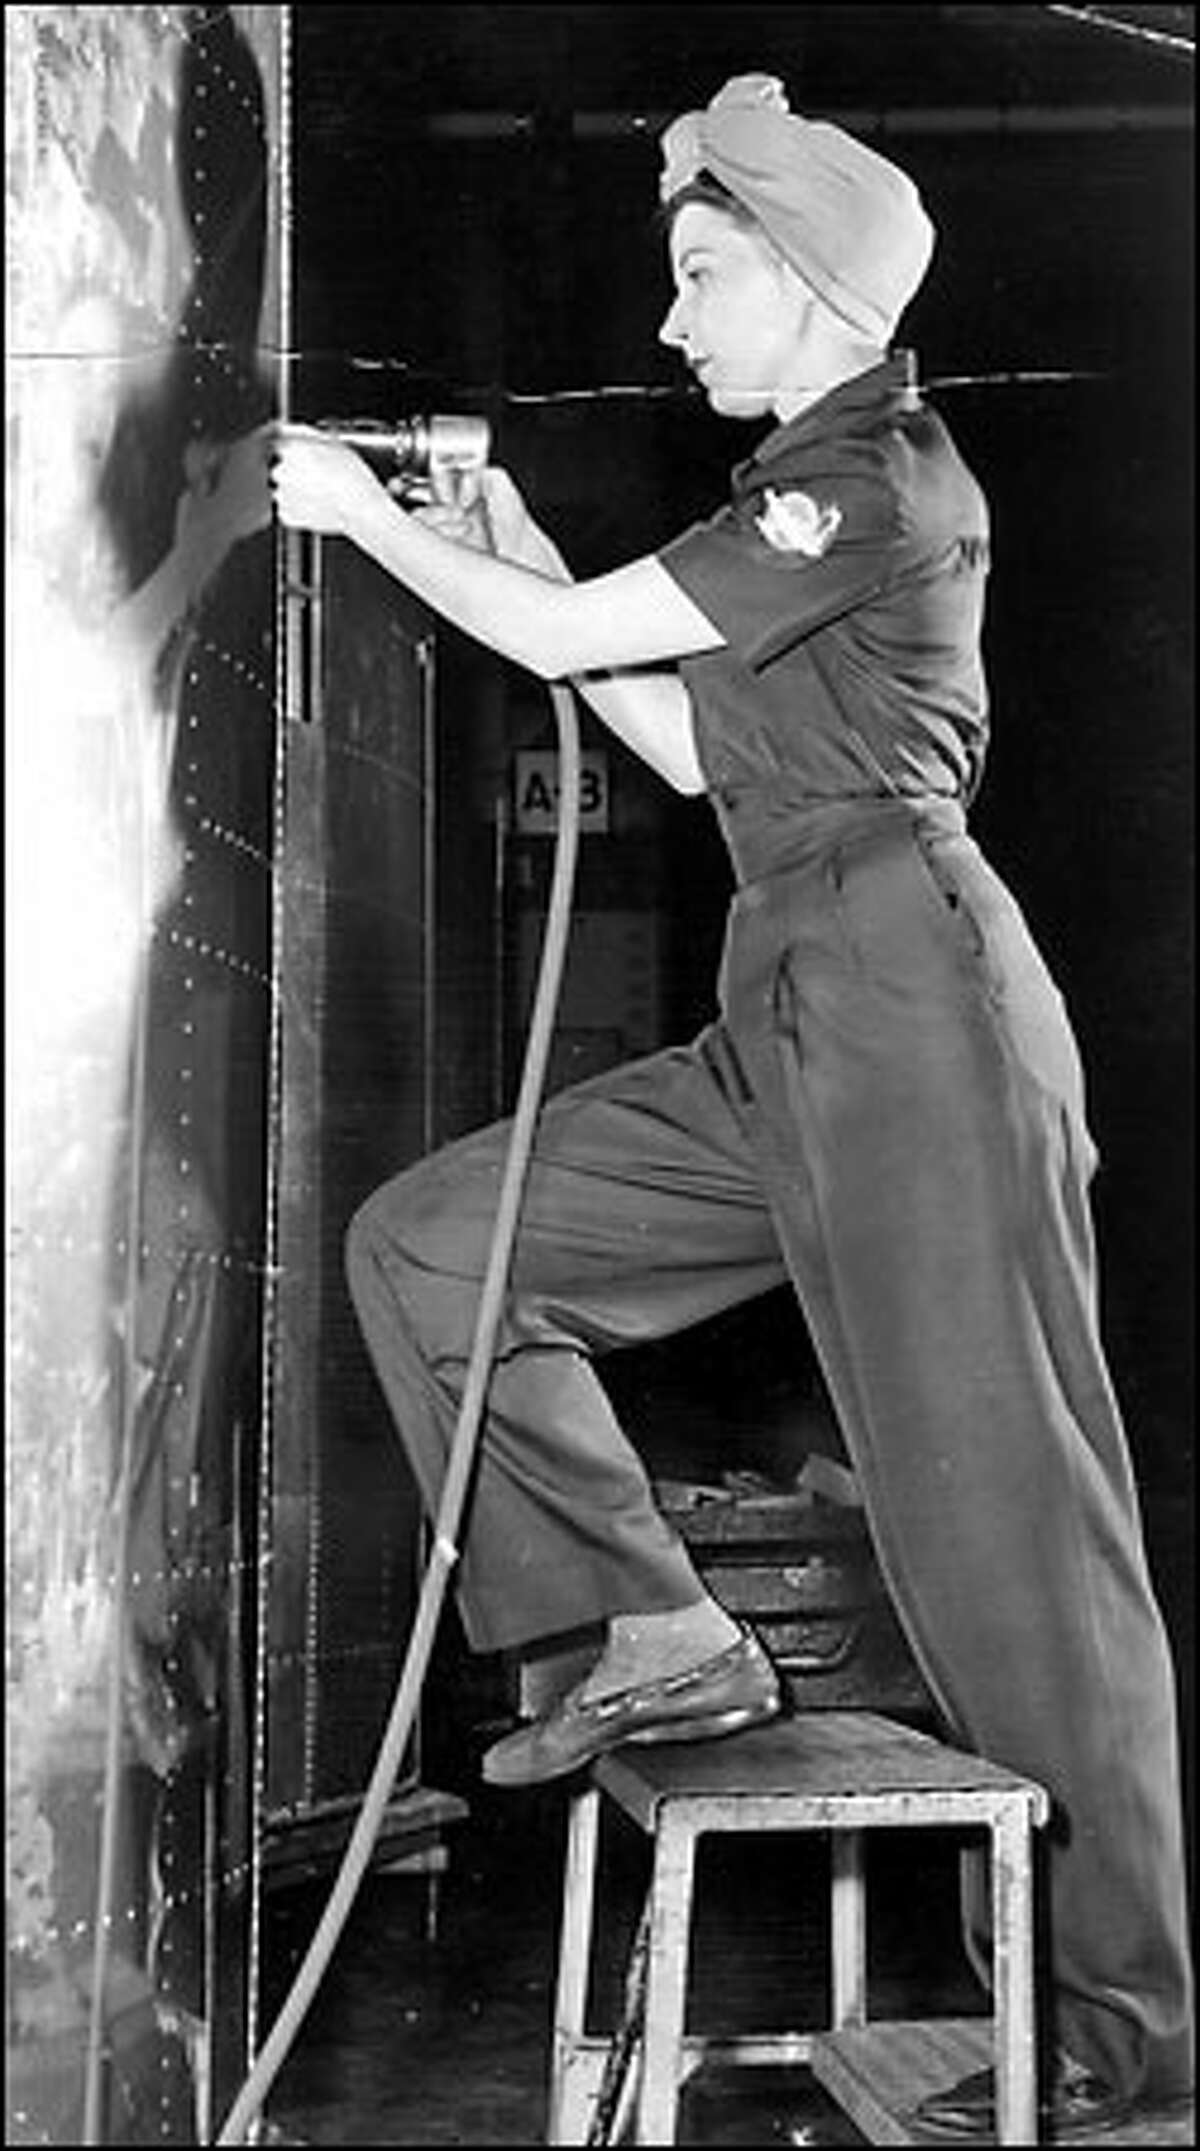 Rosie the Riveter, 1943: Elaine Tosch does her riveting clad in a fashionable Flying Fortress uniform by Miss King. Thousands of women joined the Boeing production line during World War II as airplane output shifted into high gear.